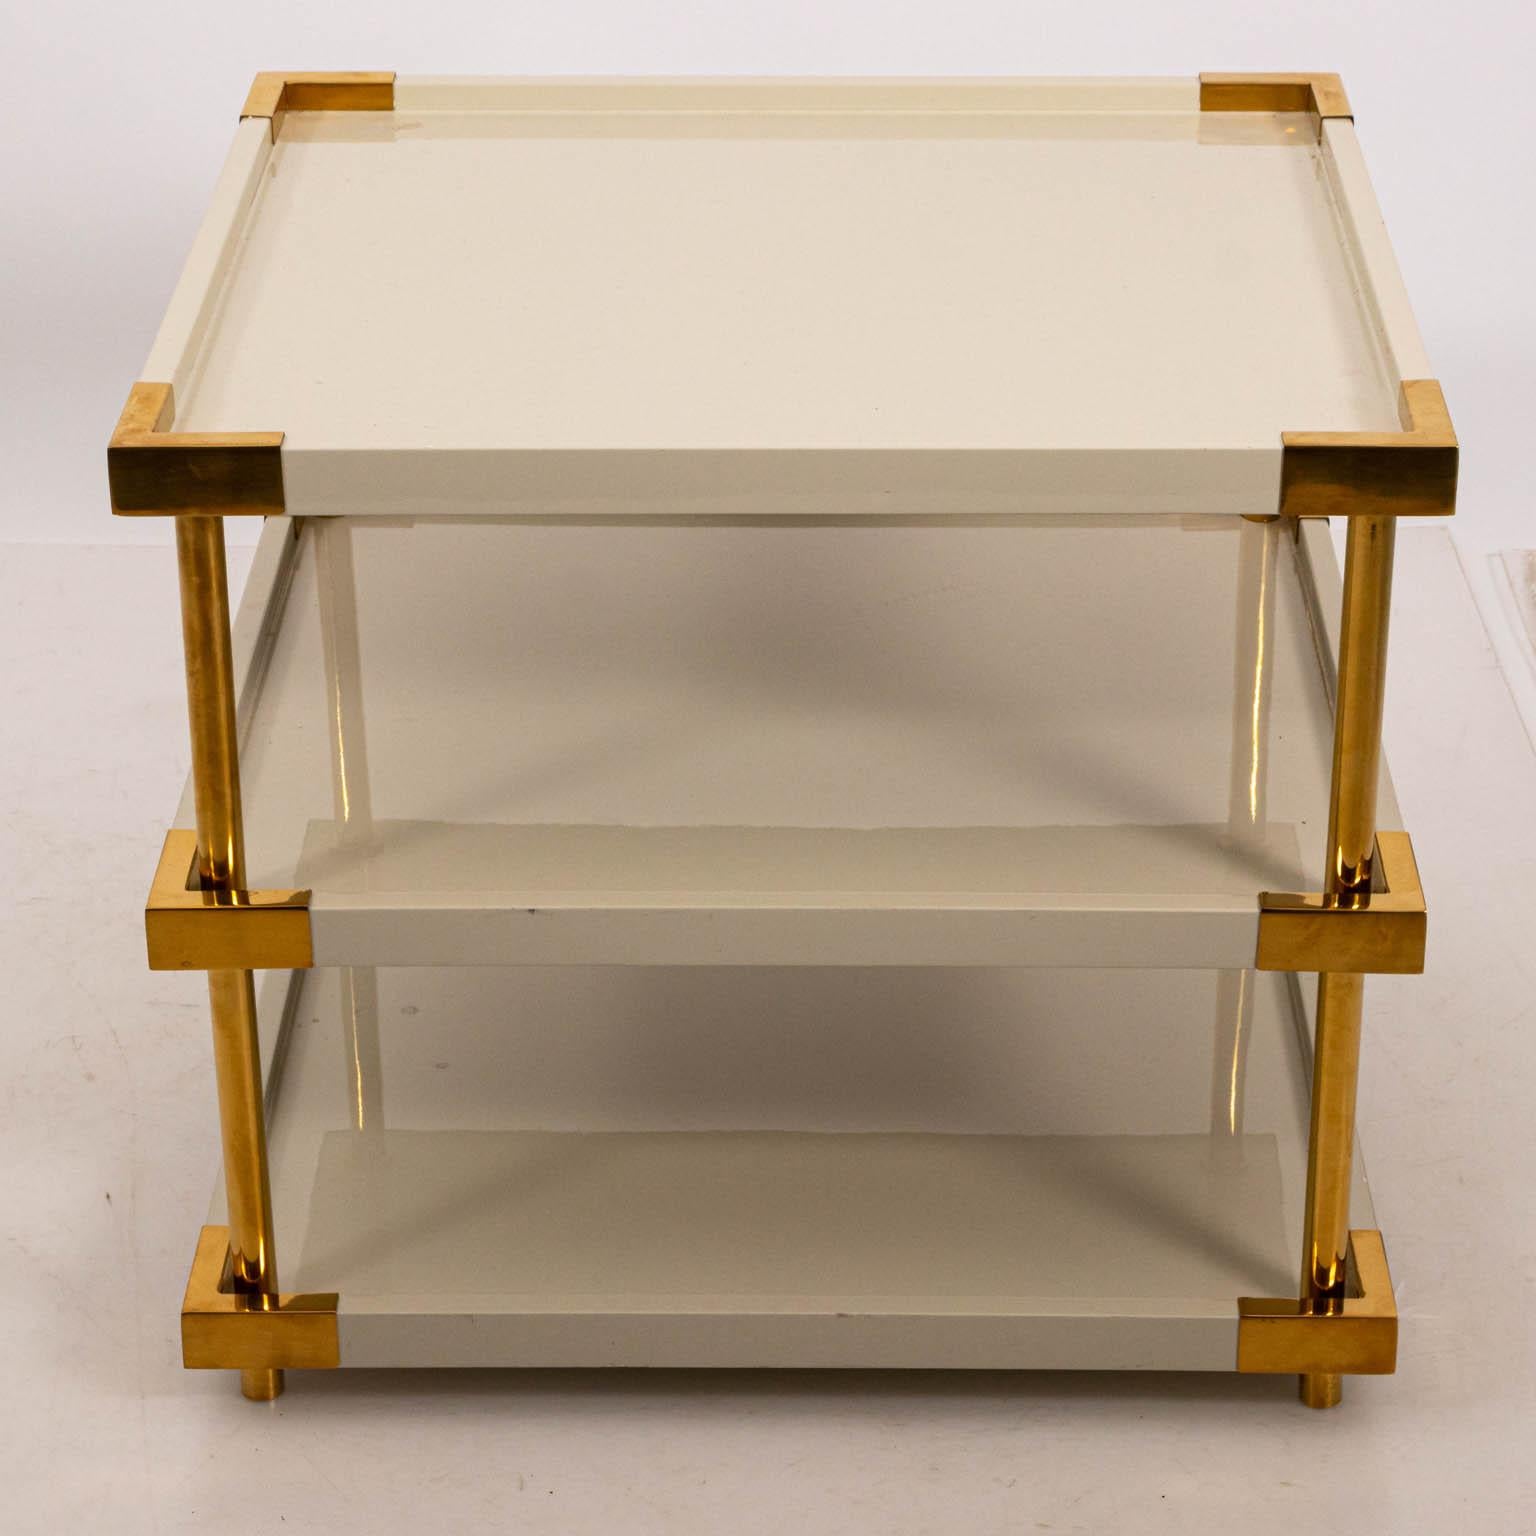 Contemporary style square three tier table with brass mounts, circa 2010. The piece is also lacquered in white. Please note of wear consistent with age including surface scratches. Made in the United States.